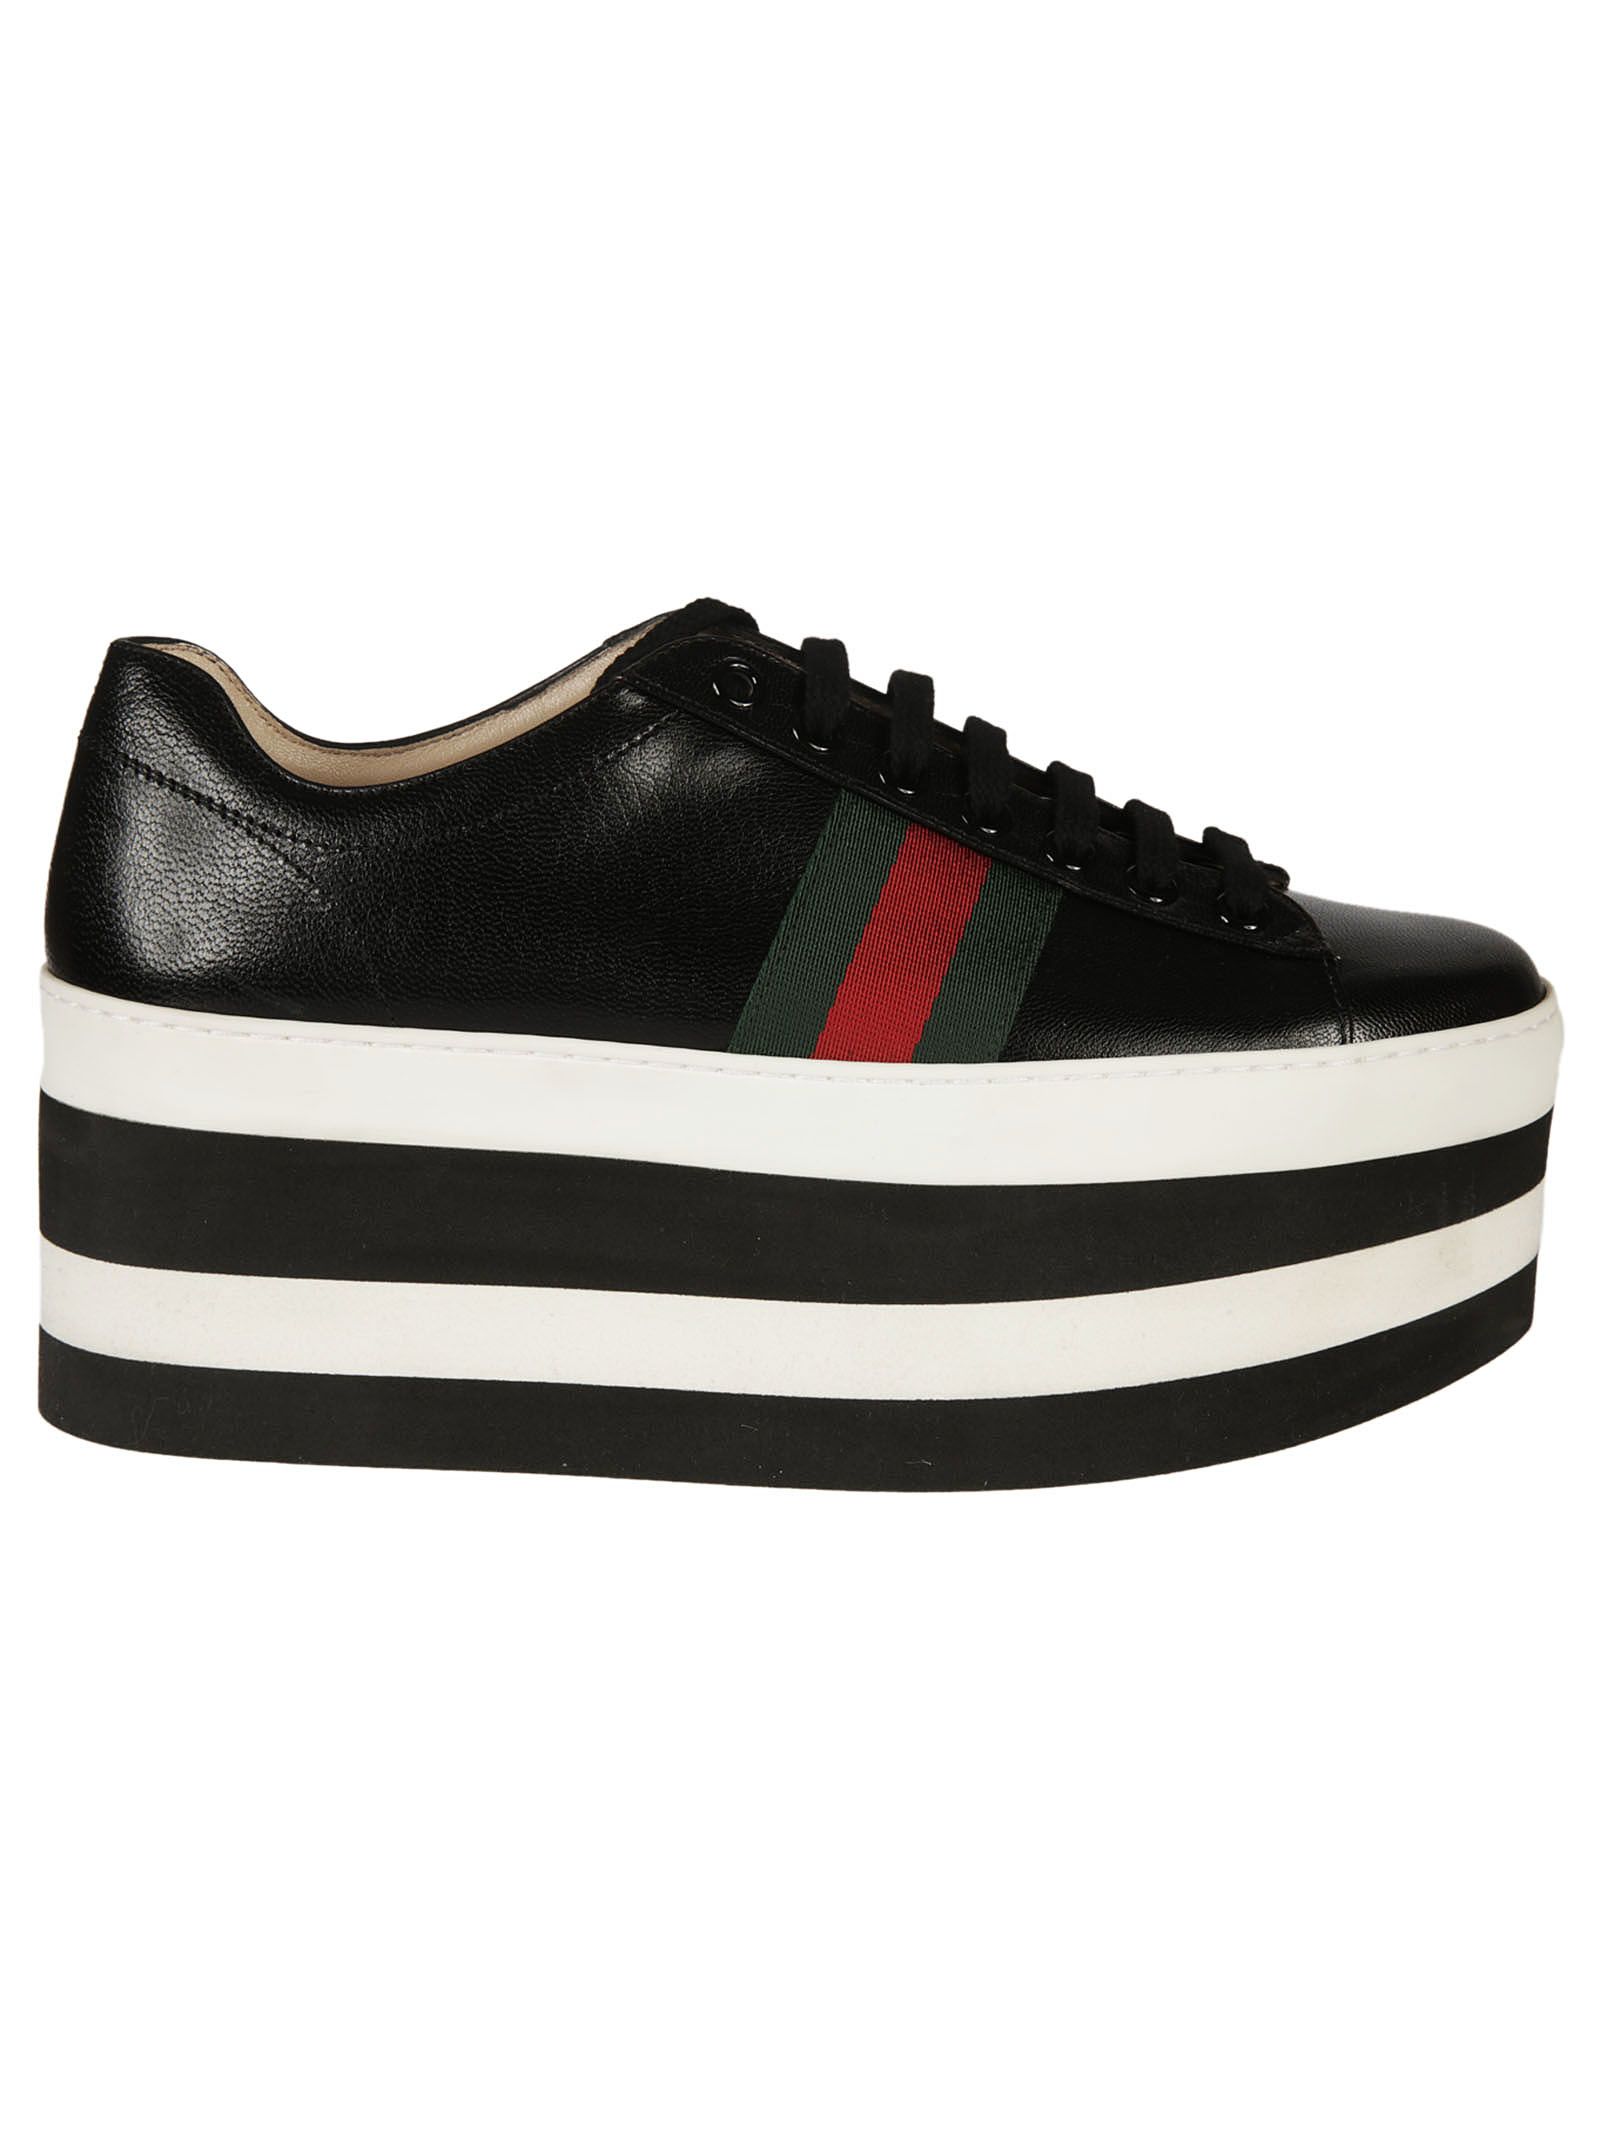 GUCCI Striped Platform Leather Sneakers In Black And White | ModeSens